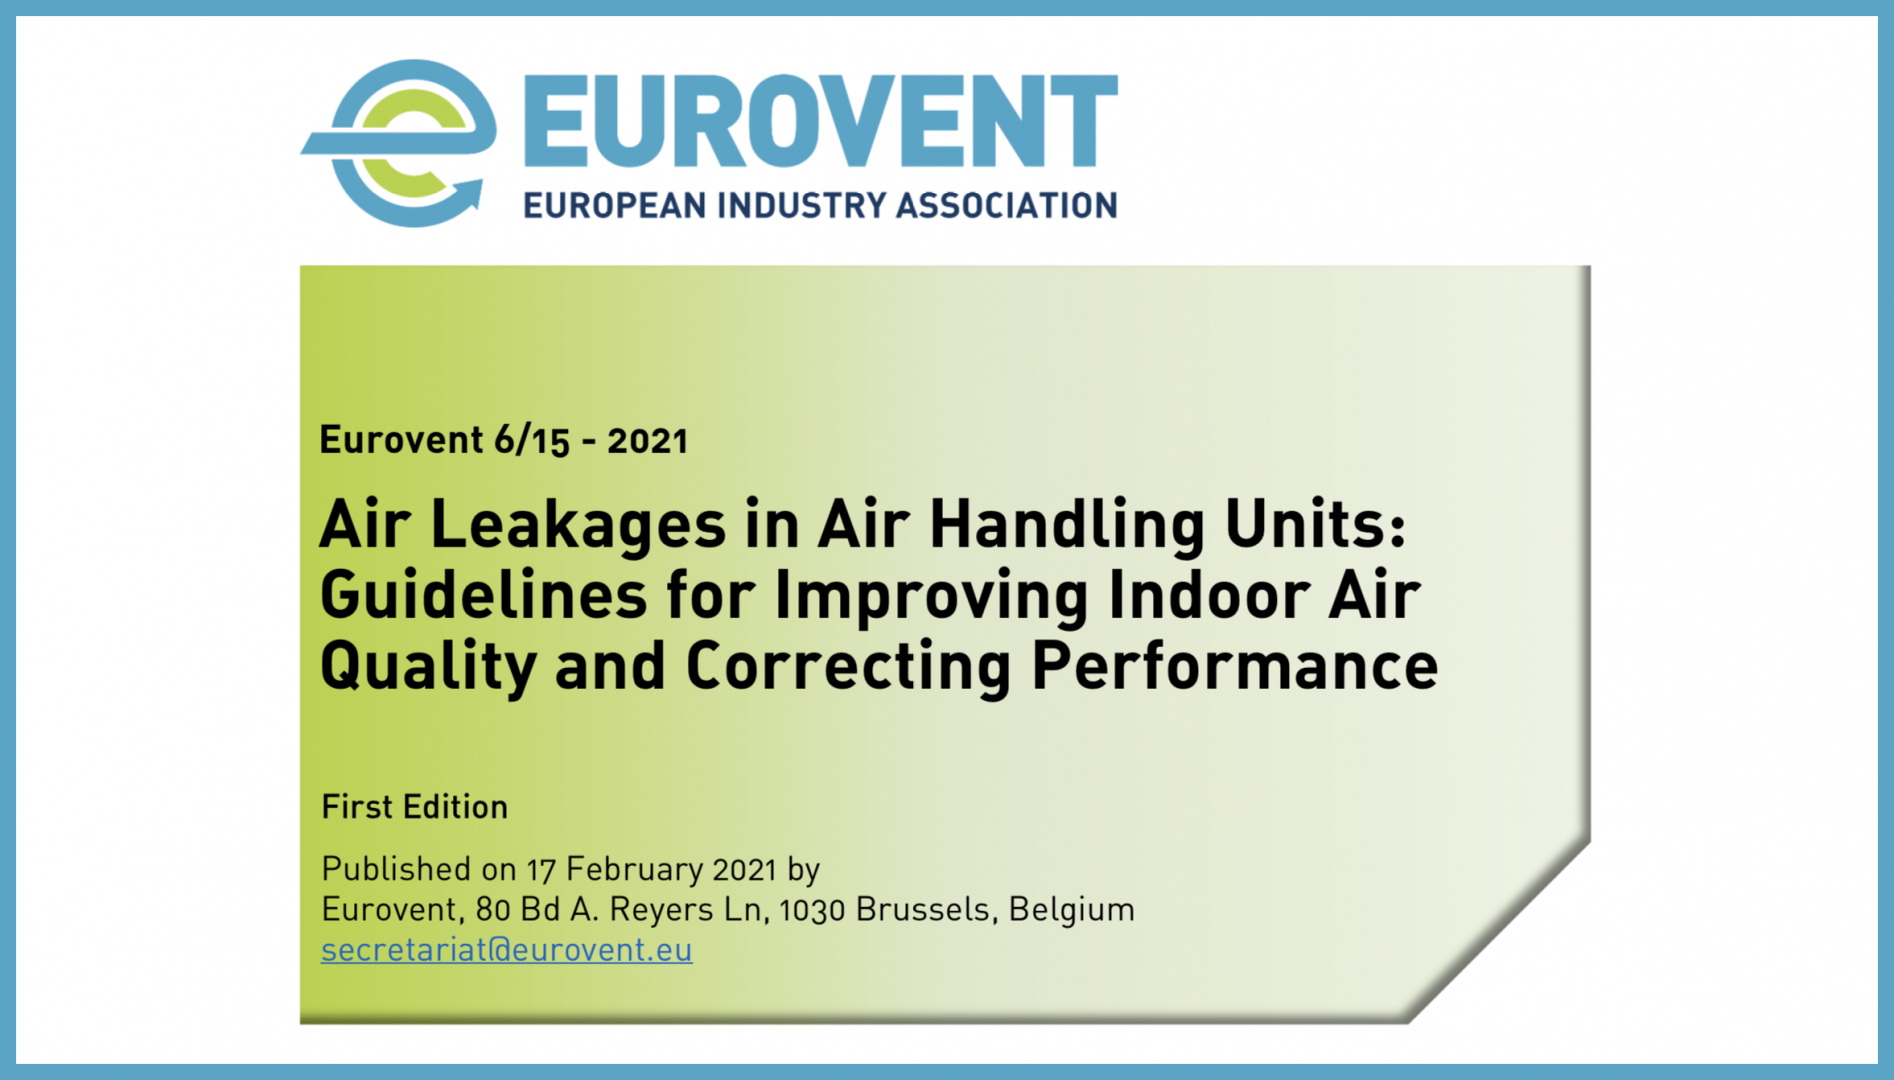 2021 - Eurovent Recommendation on air leakages published